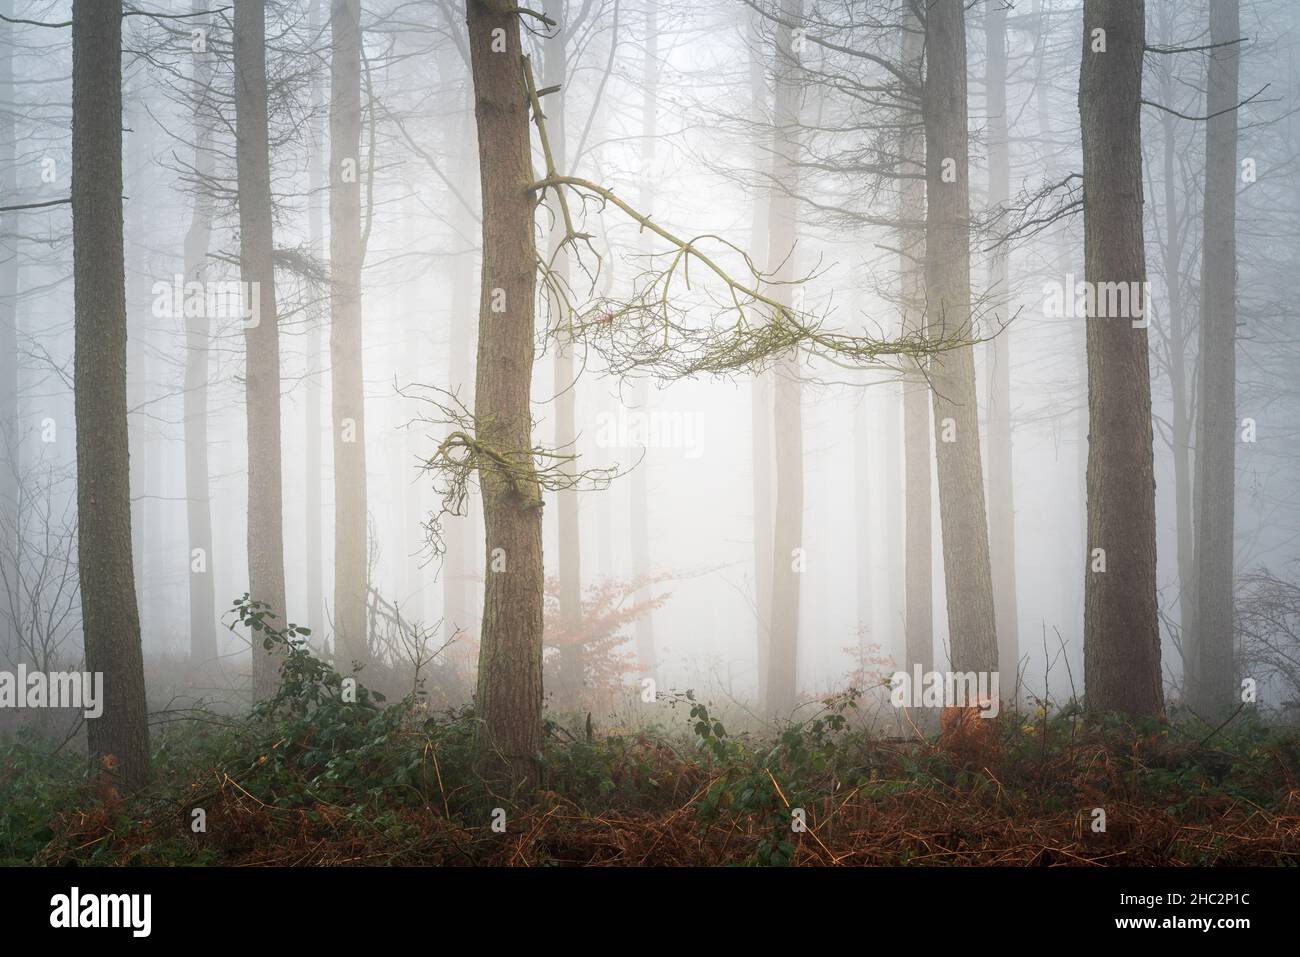 Thick fog envelopes Chevin Forest Park on a chilly December morning with the outlines of winter trees fading into the mist. Stock Photo